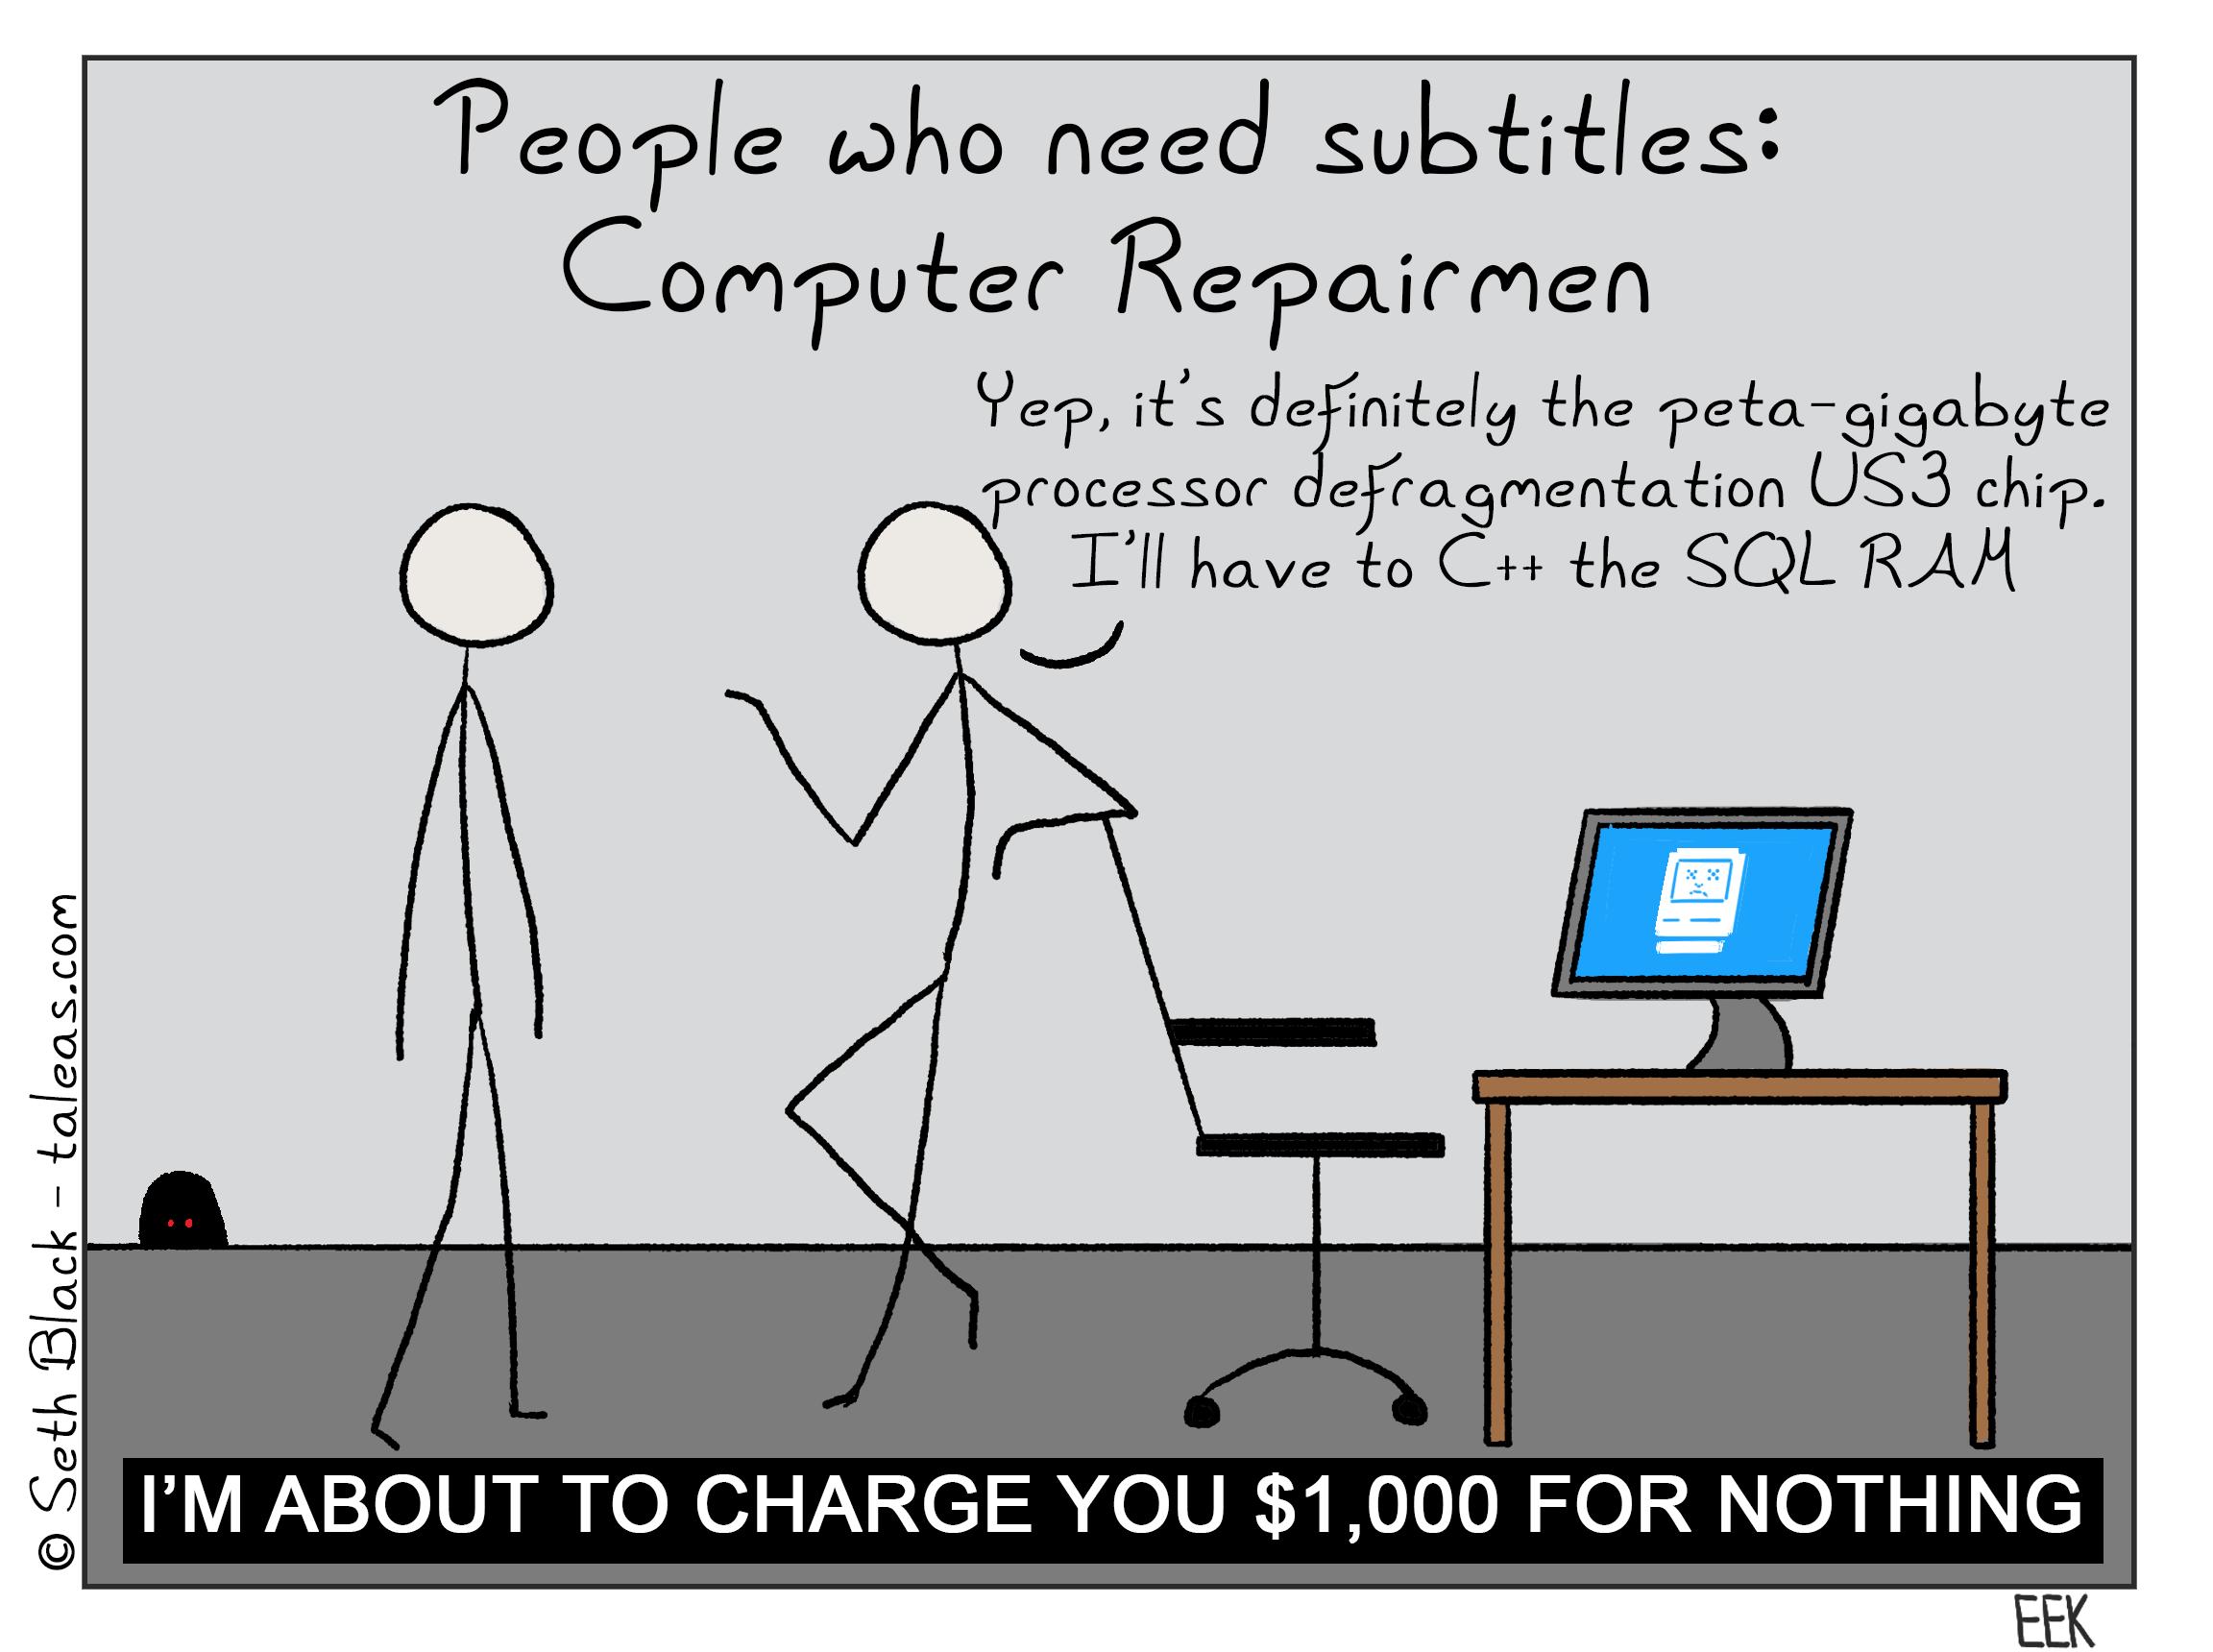 People who need subtitles: Computer Repairmen. "Yup. It's definitely the peta-giga-byte processor defragmentation USB chip. I'll have to C++ the SQL RAM." Subtitle: "I'm about to charge you $1,000 for nothing."